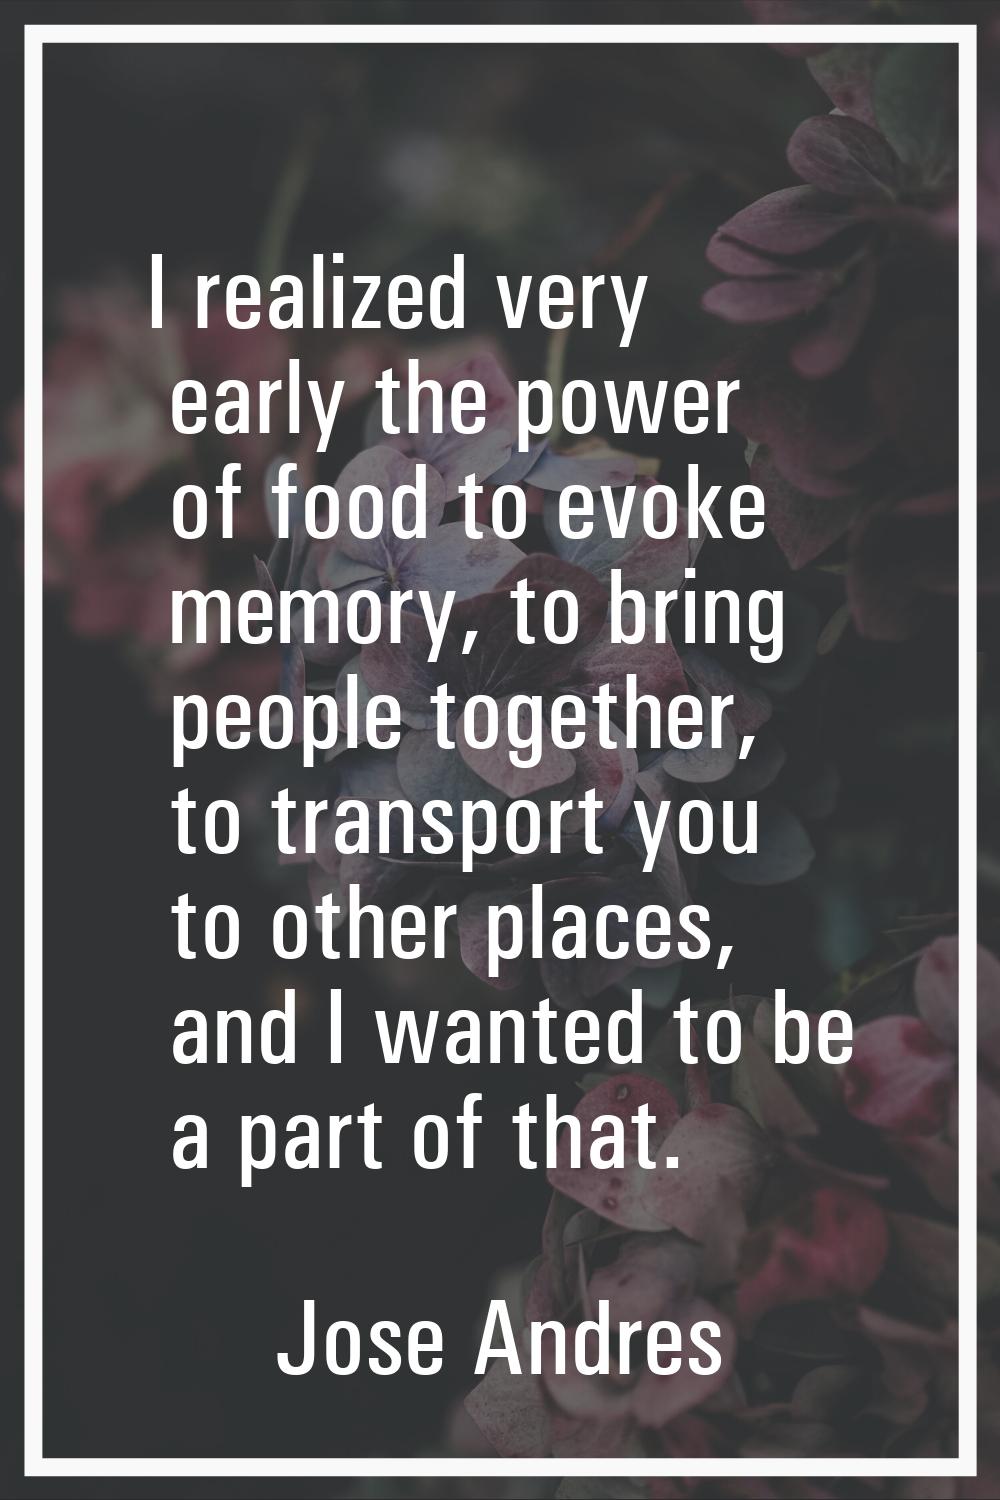 I realized very early the power of food to evoke memory, to bring people together, to transport you